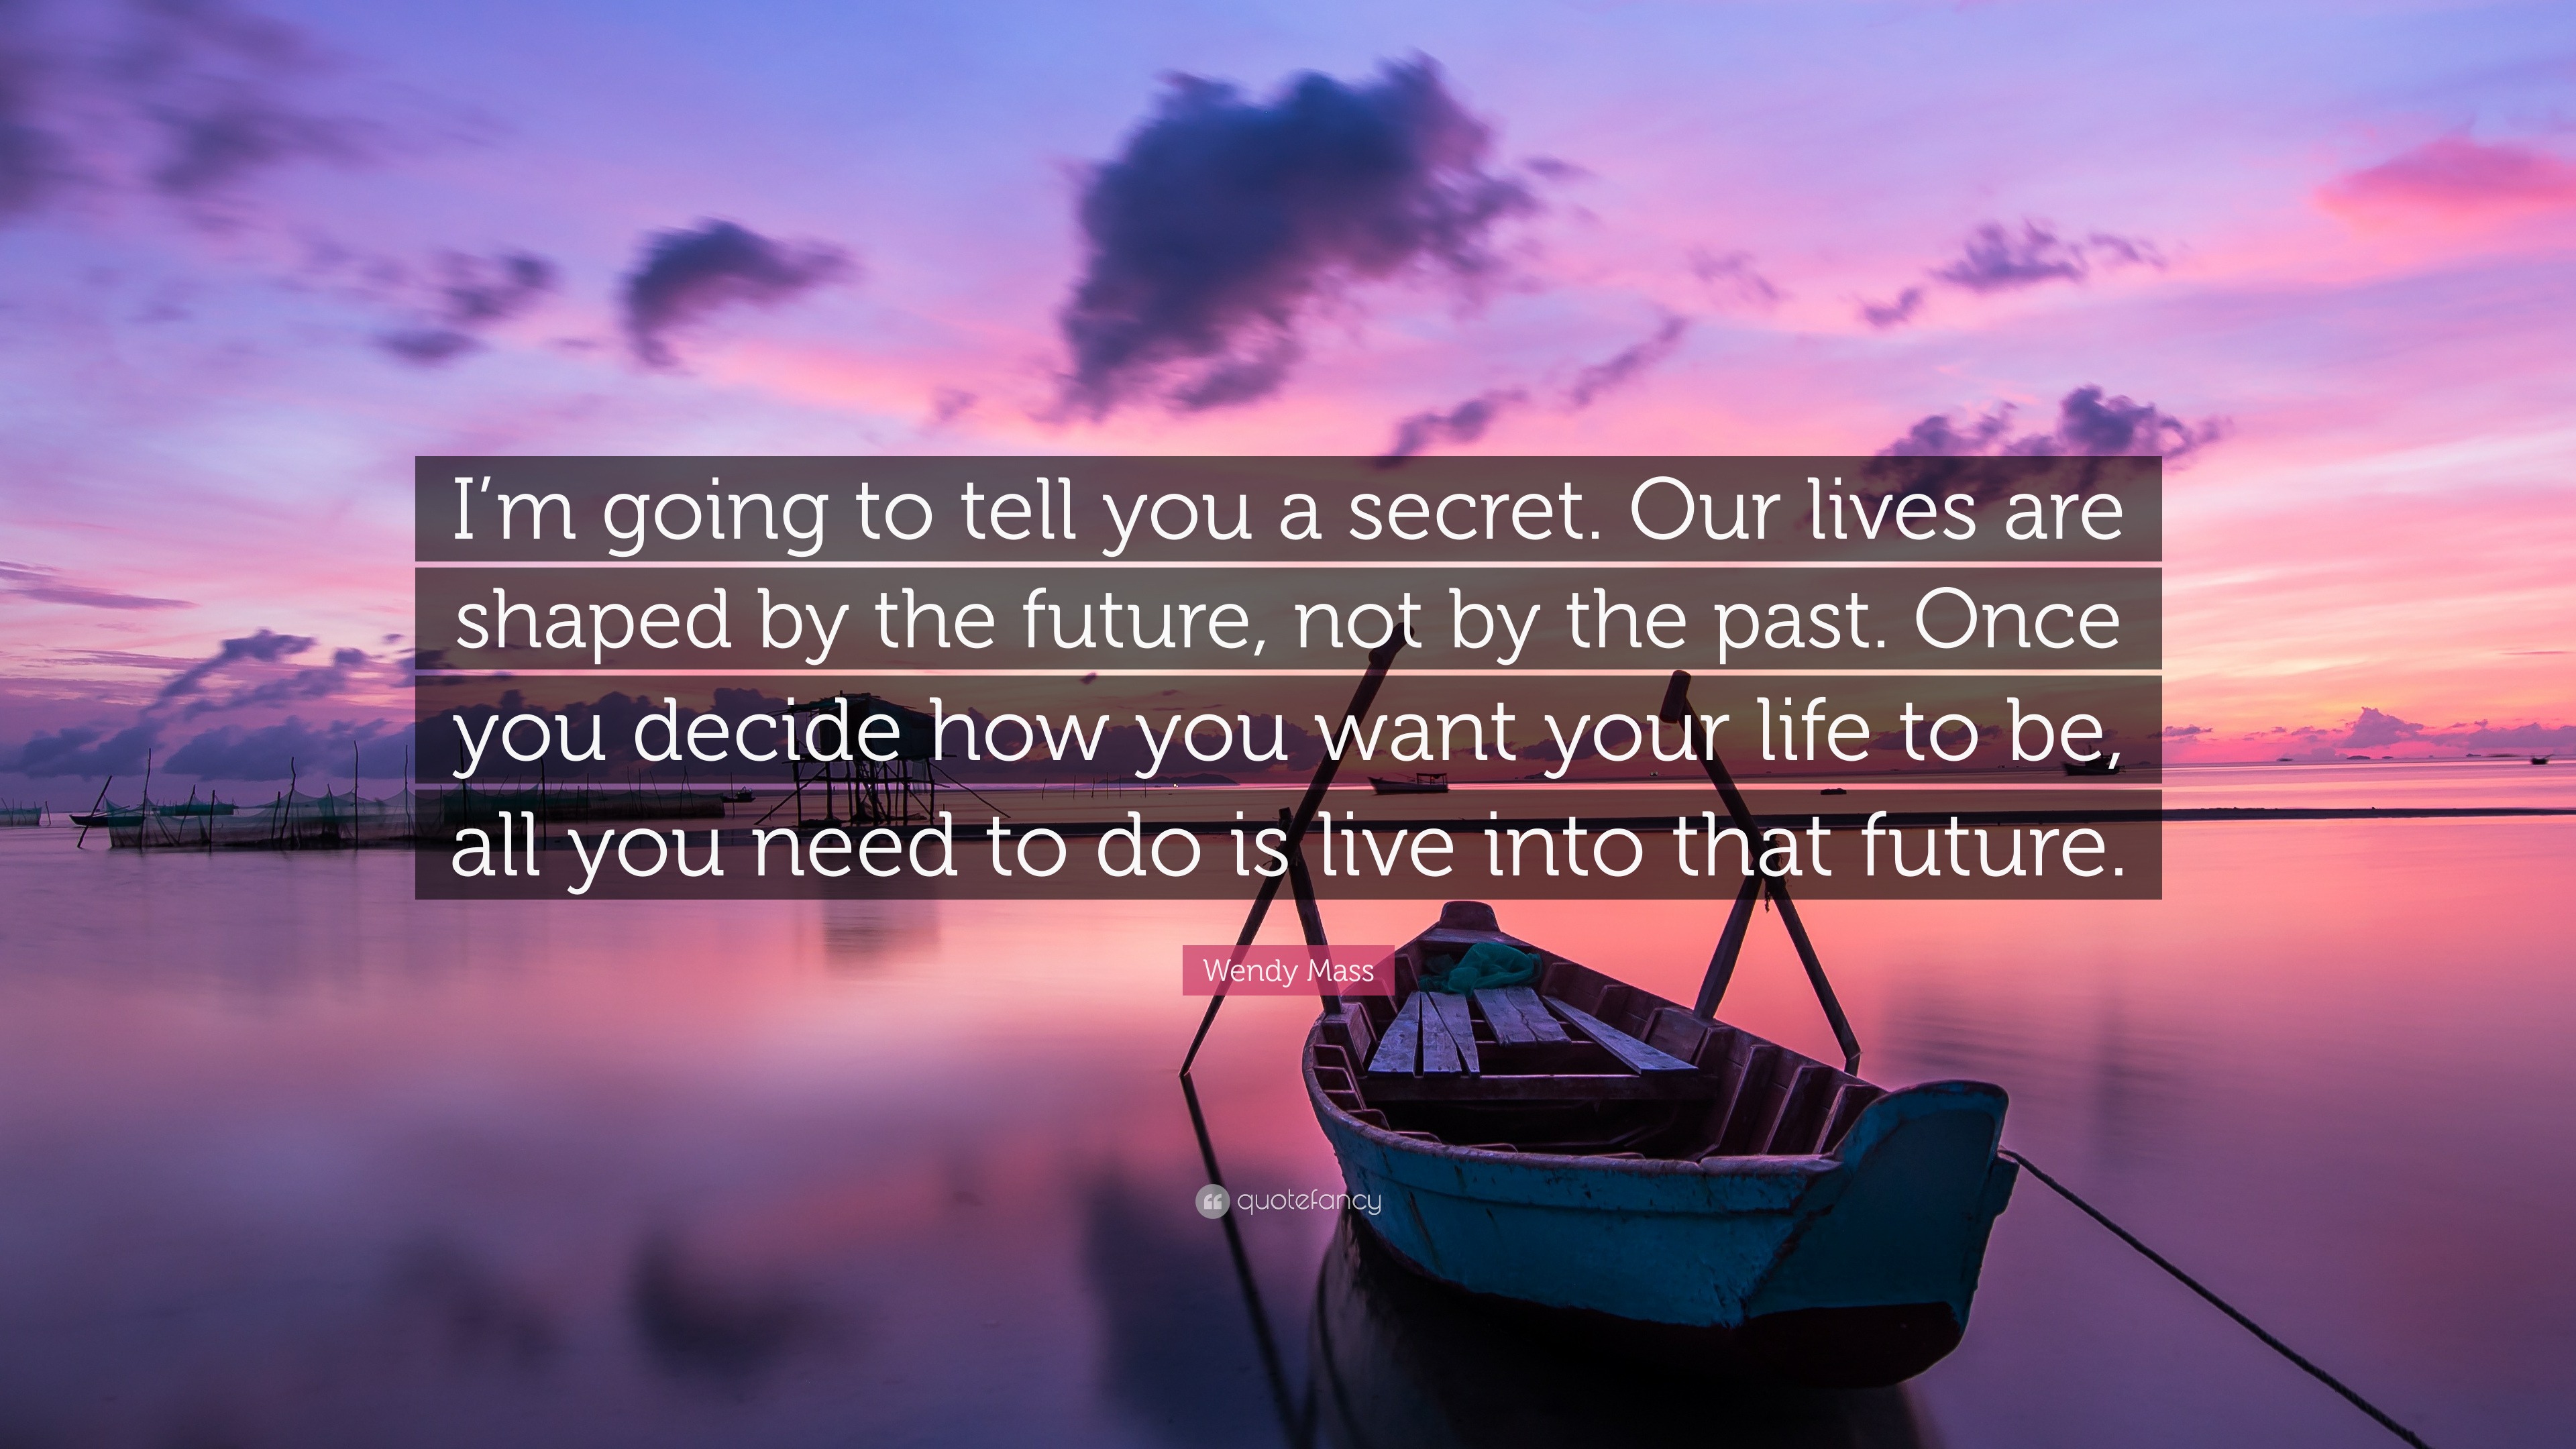 https://quotefancy.com/media/wallpaper/3840x2160/2618151-Wendy-Mass-Quote-I-m-going-to-tell-you-a-secret-Our-lives-are.jpg